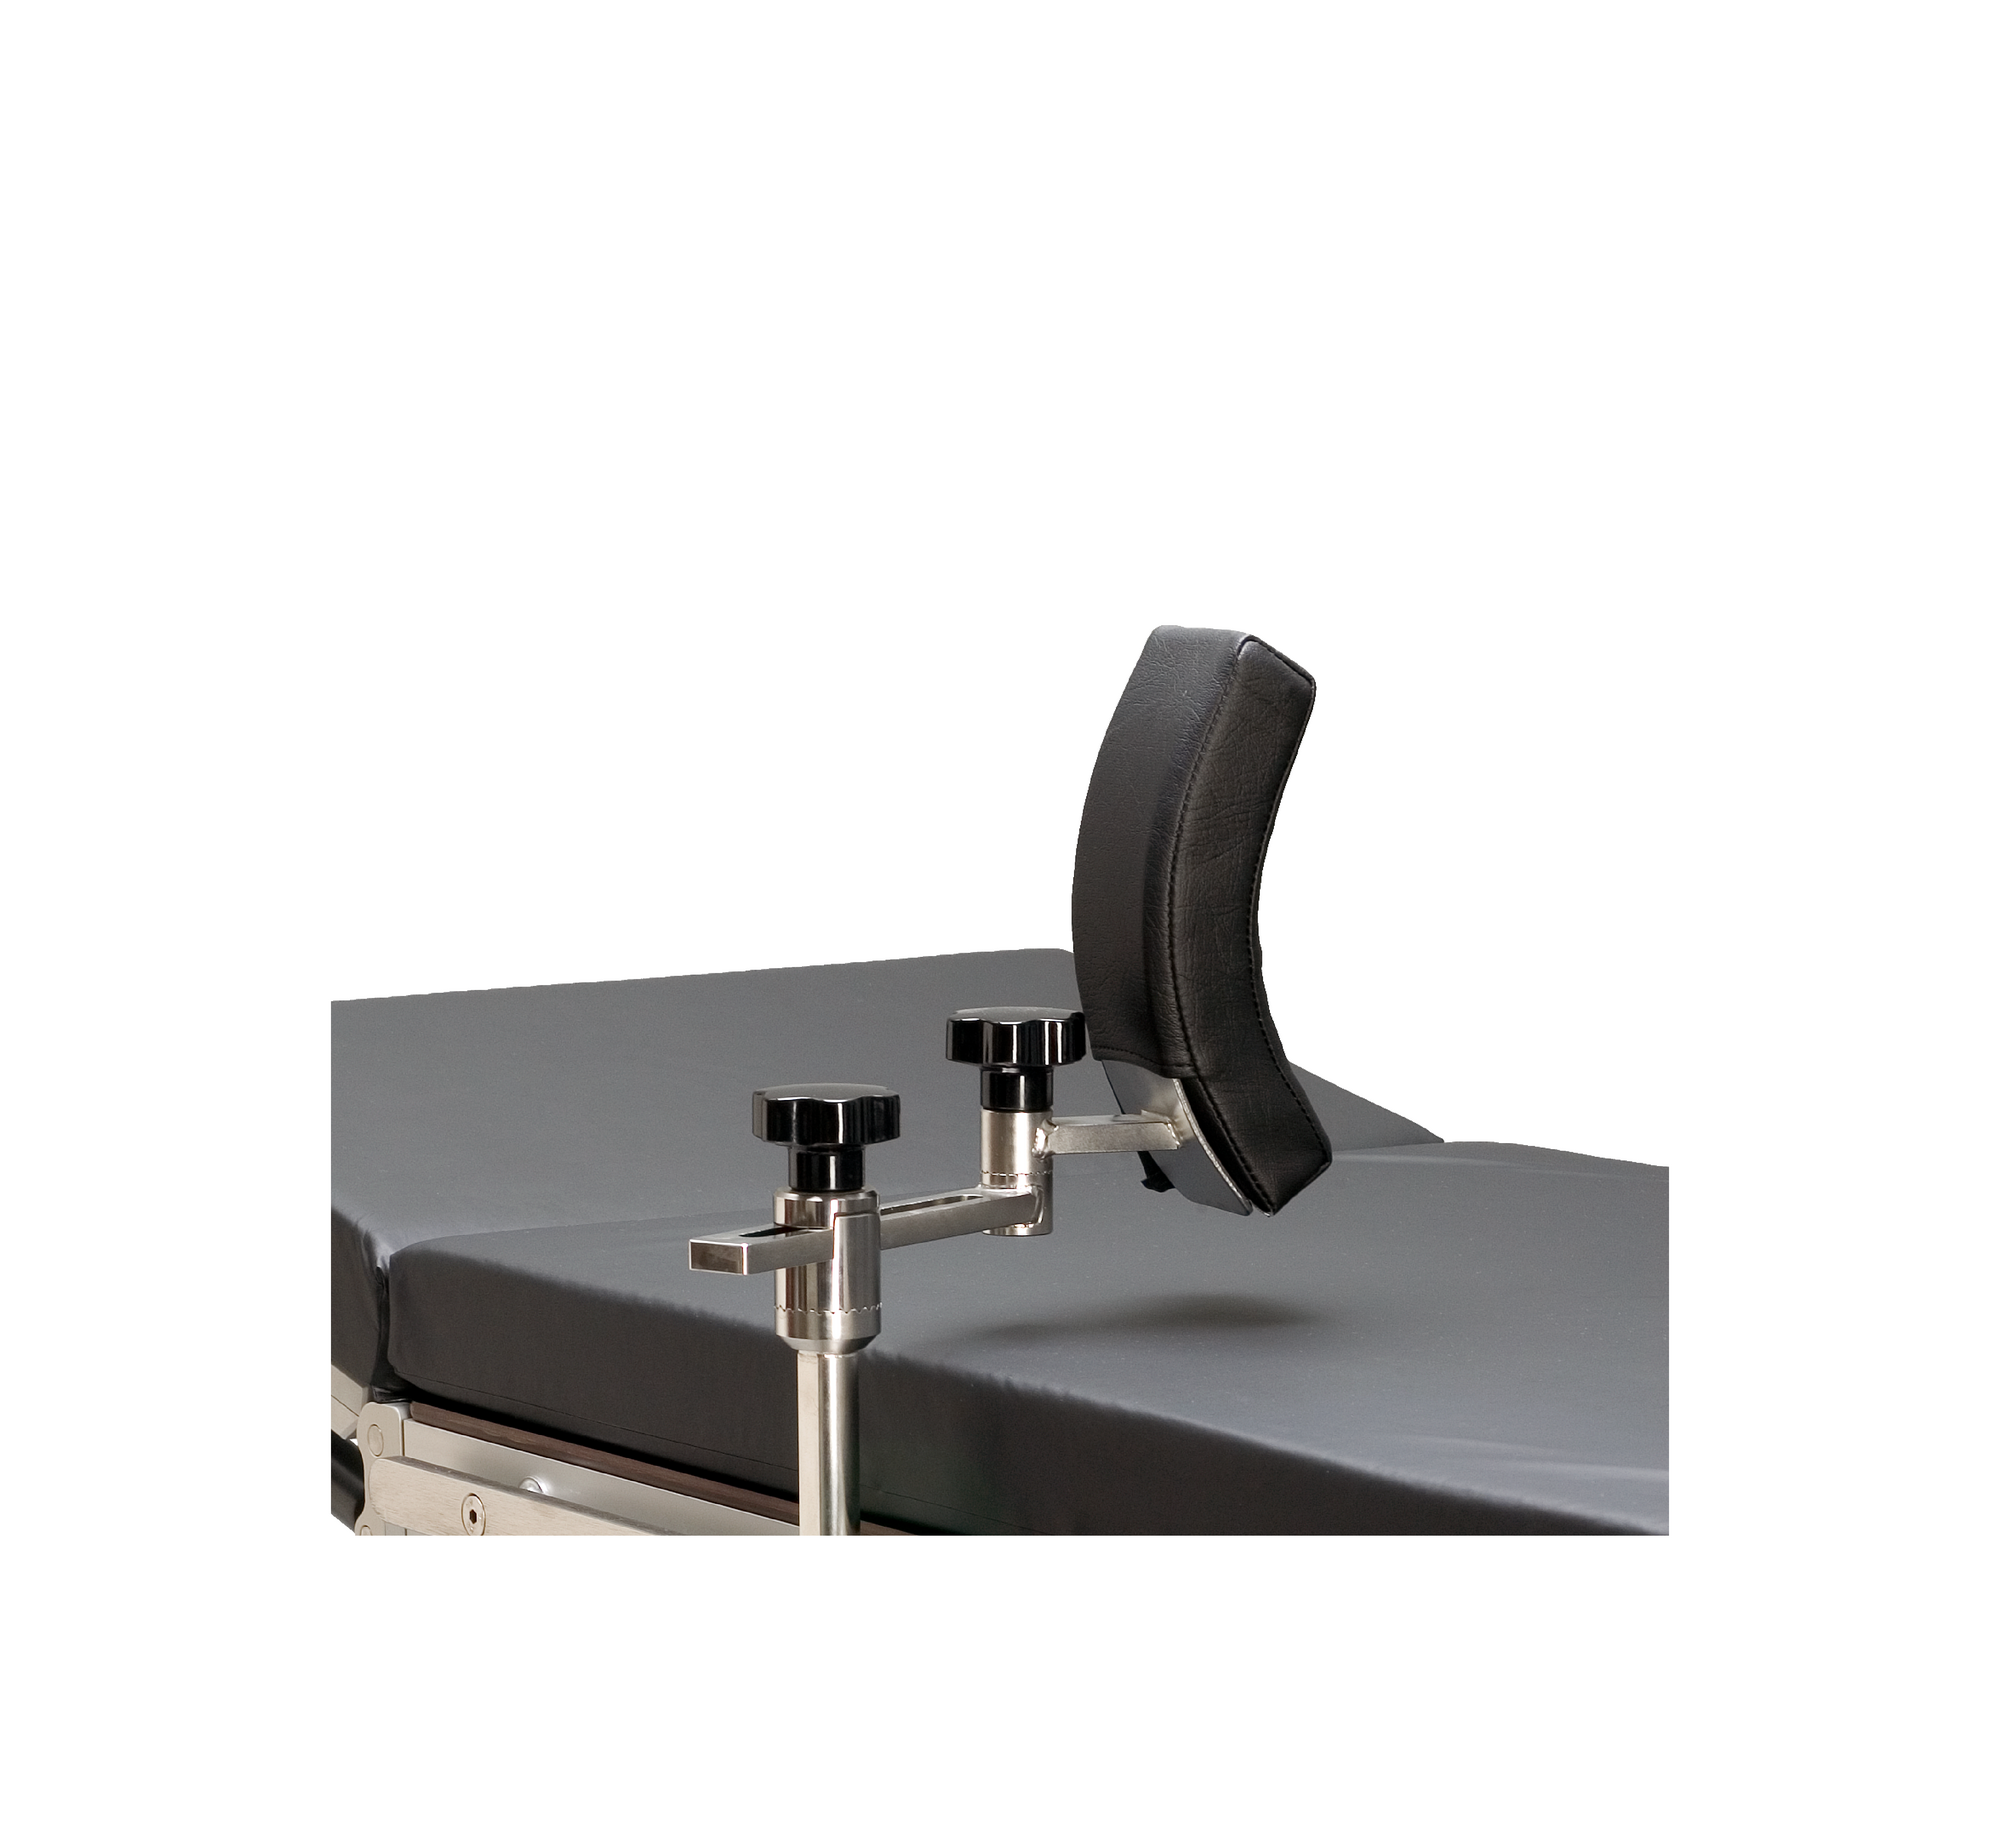 Hipac Narrow Rotatable Lateral Support